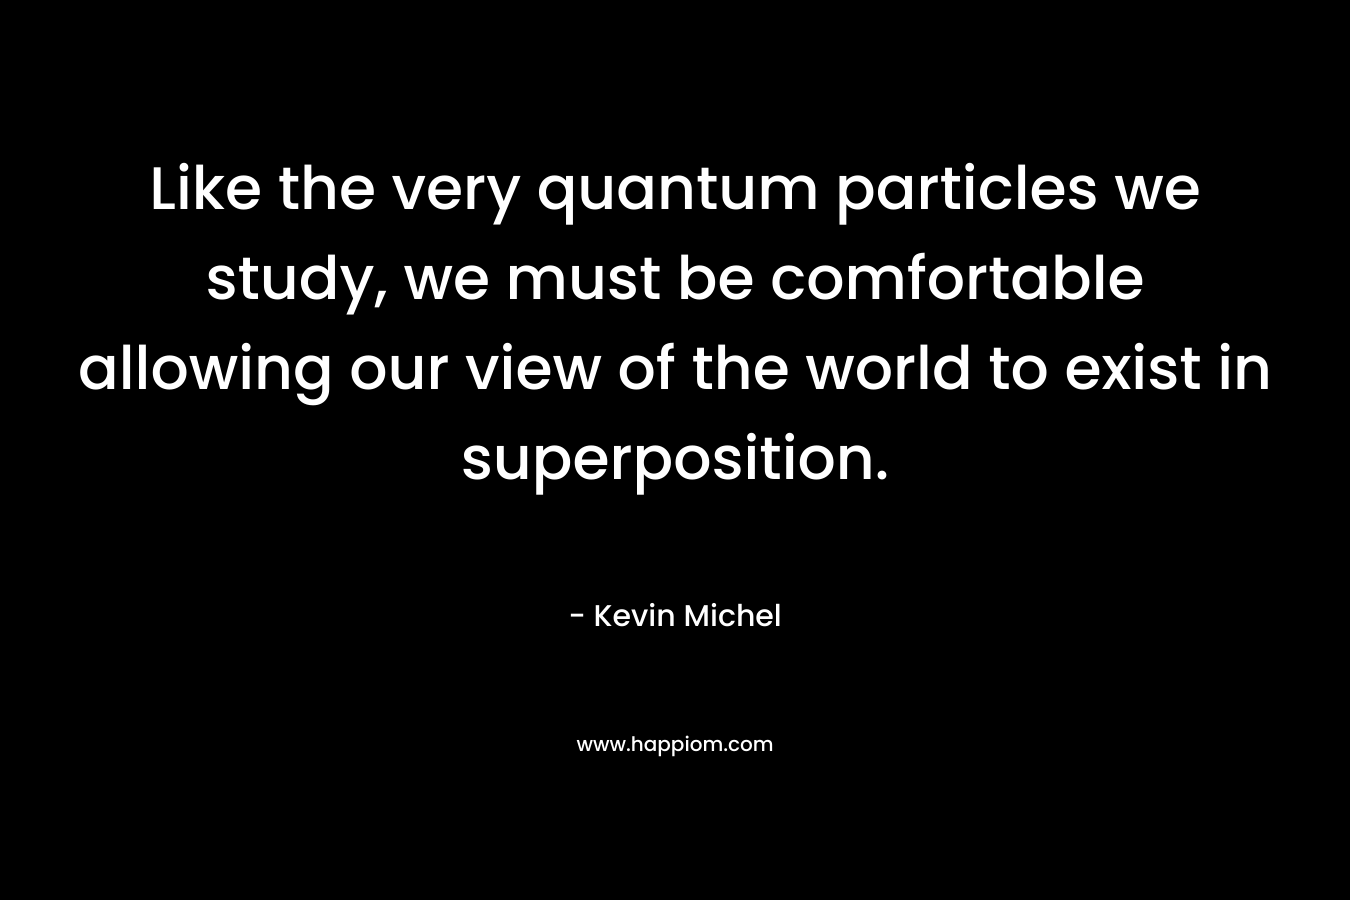 Like the very quantum particles we study, we must be comfortable allowing our view of the world to exist in superposition. – Kevin Michel